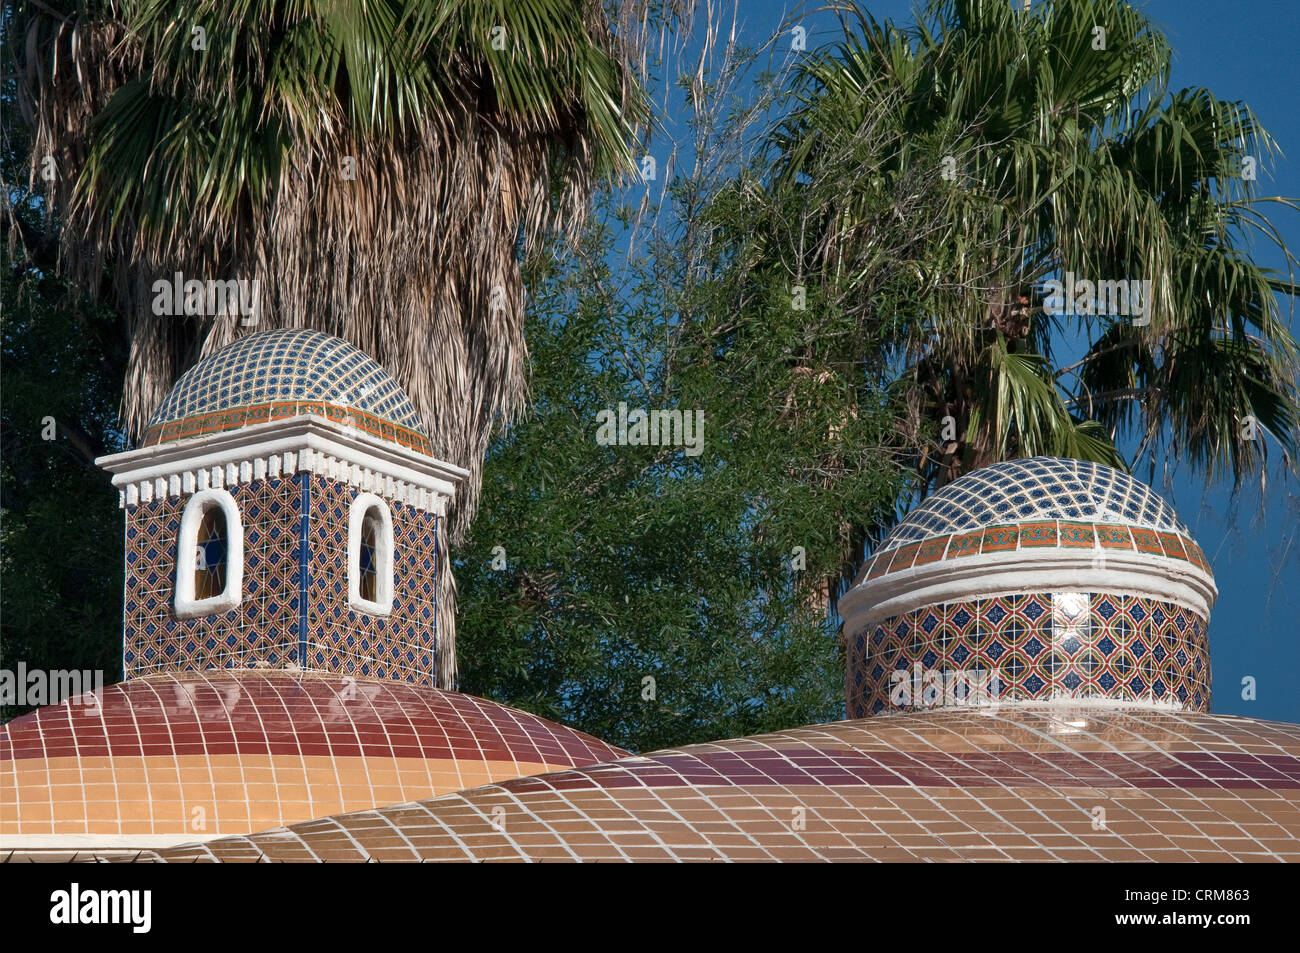 Tiled towers at house on Morelos street in Reynosa, Rio Grande Valley, Tamaulipas, Mexico Stock Photo